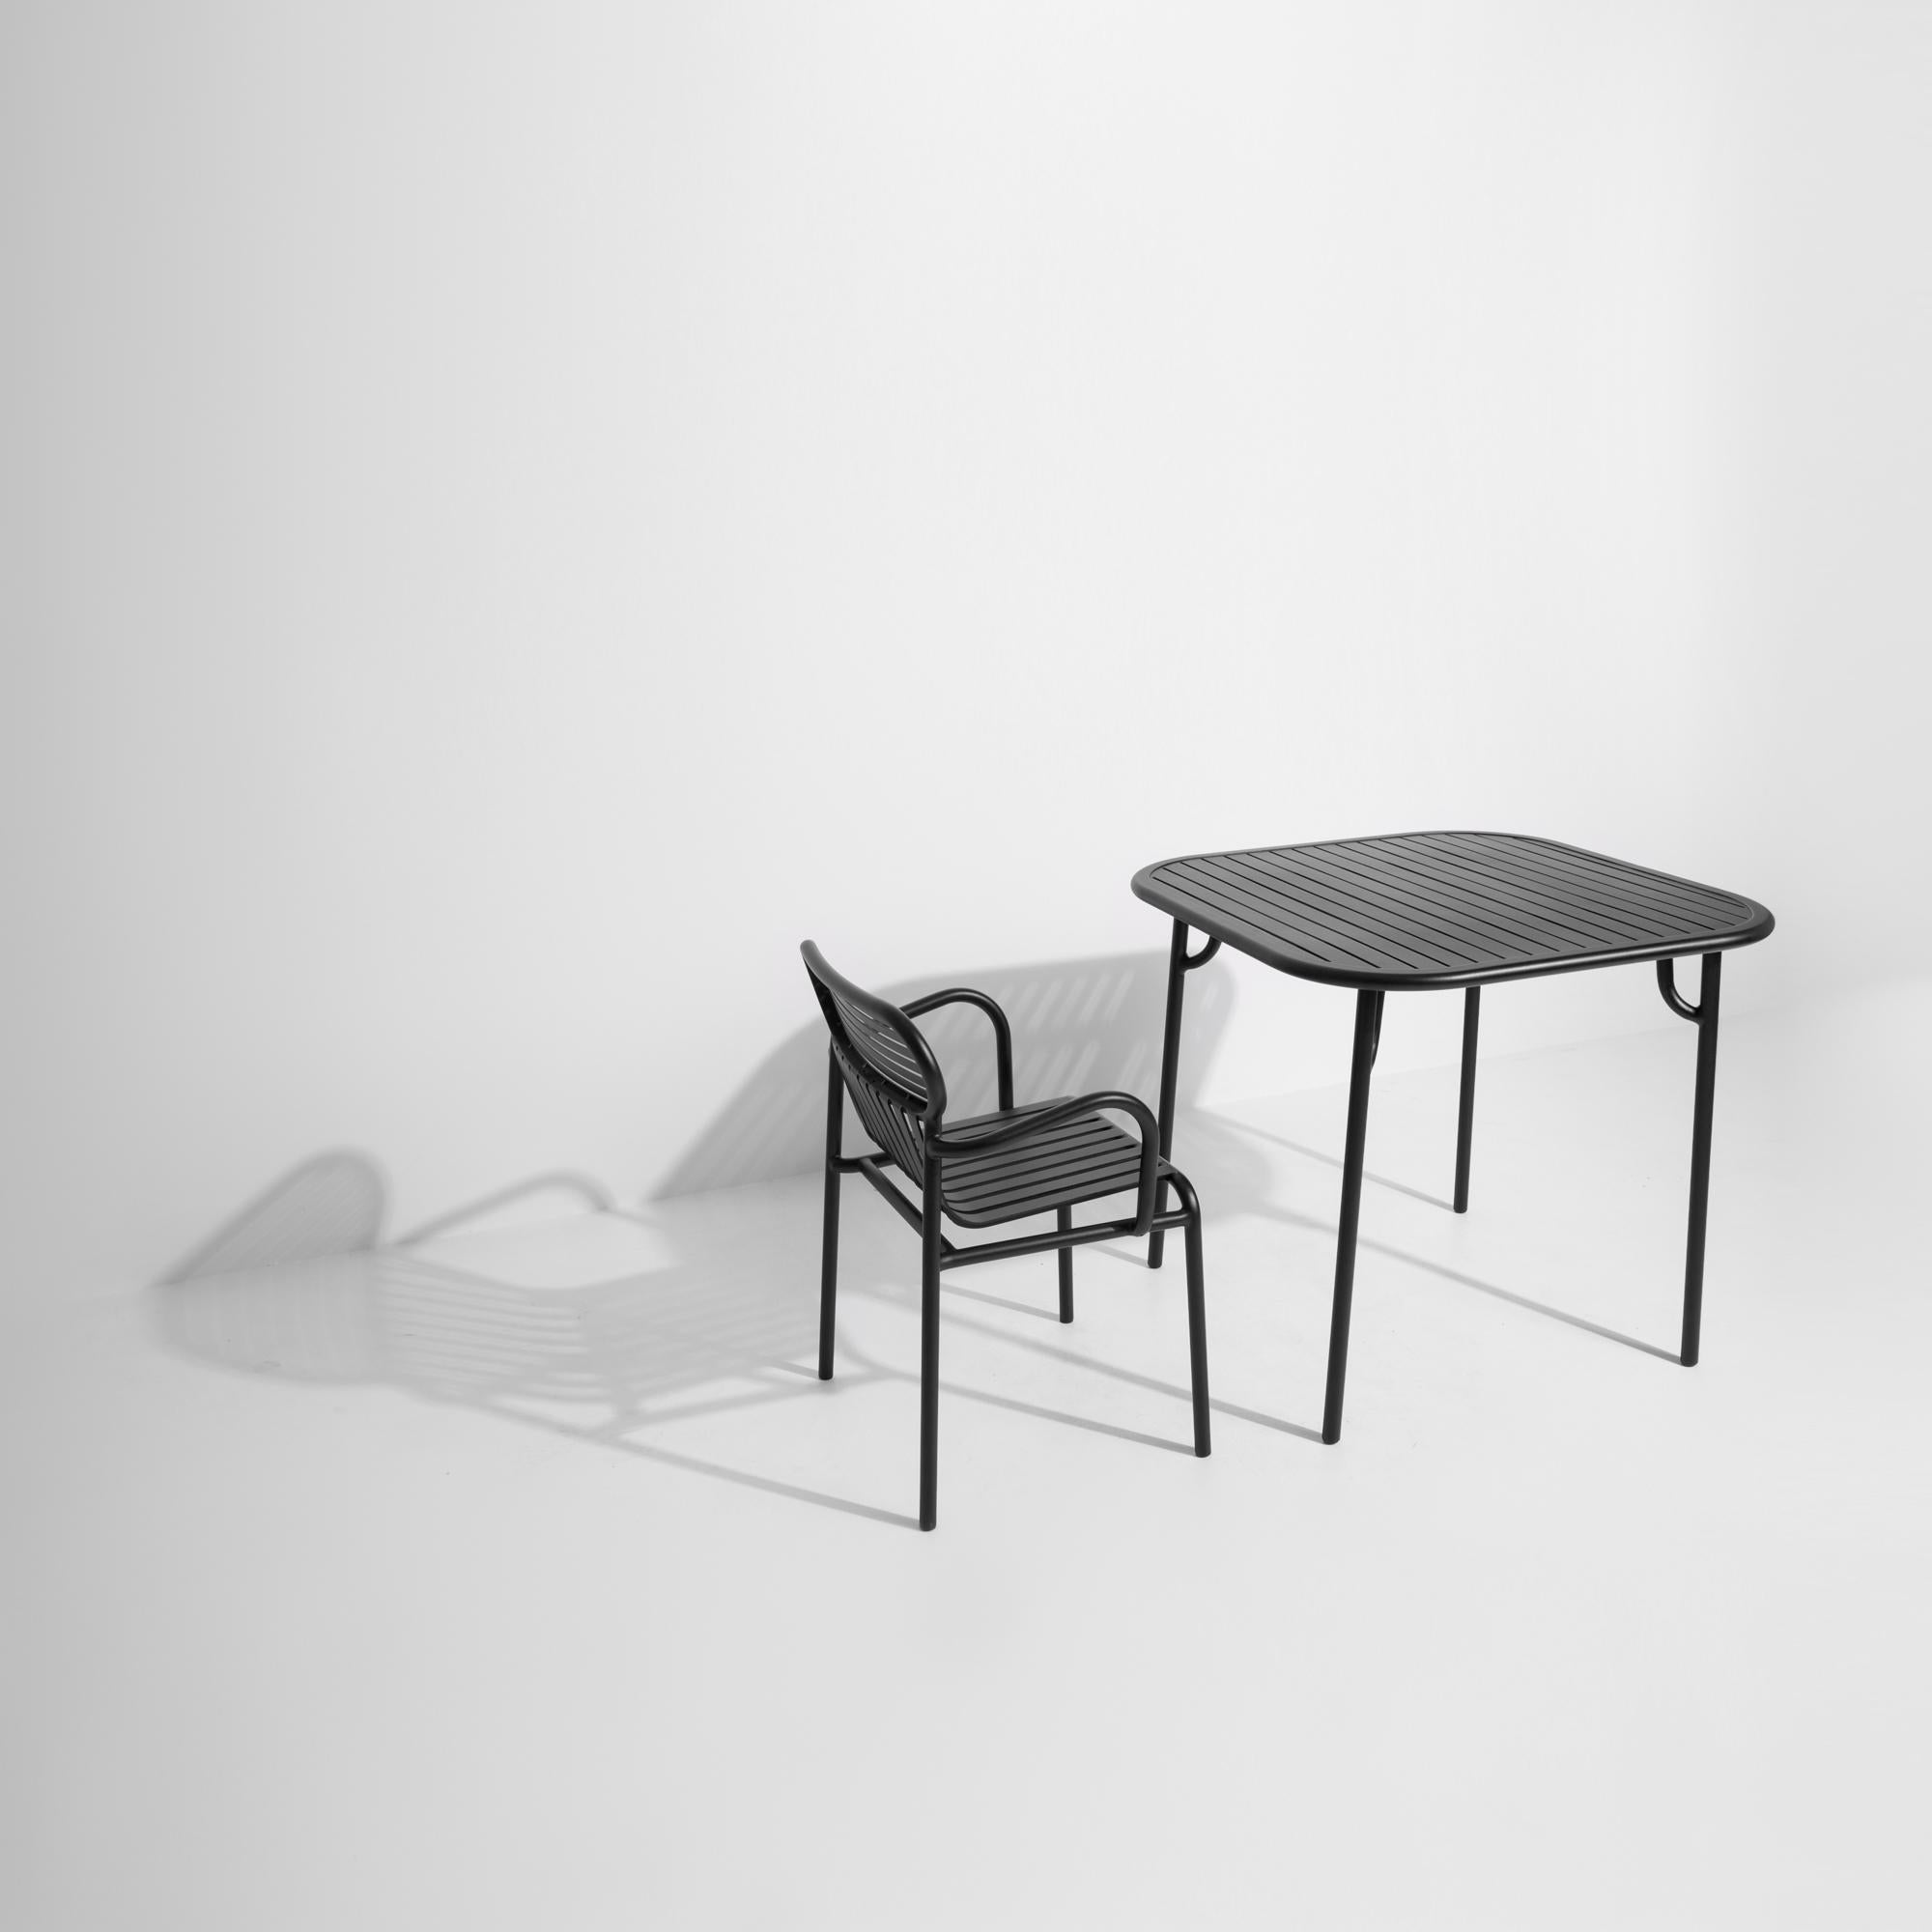 Contemporary Petite Friture Week-End Square Dining Table in Black Aluminium with Slats For Sale